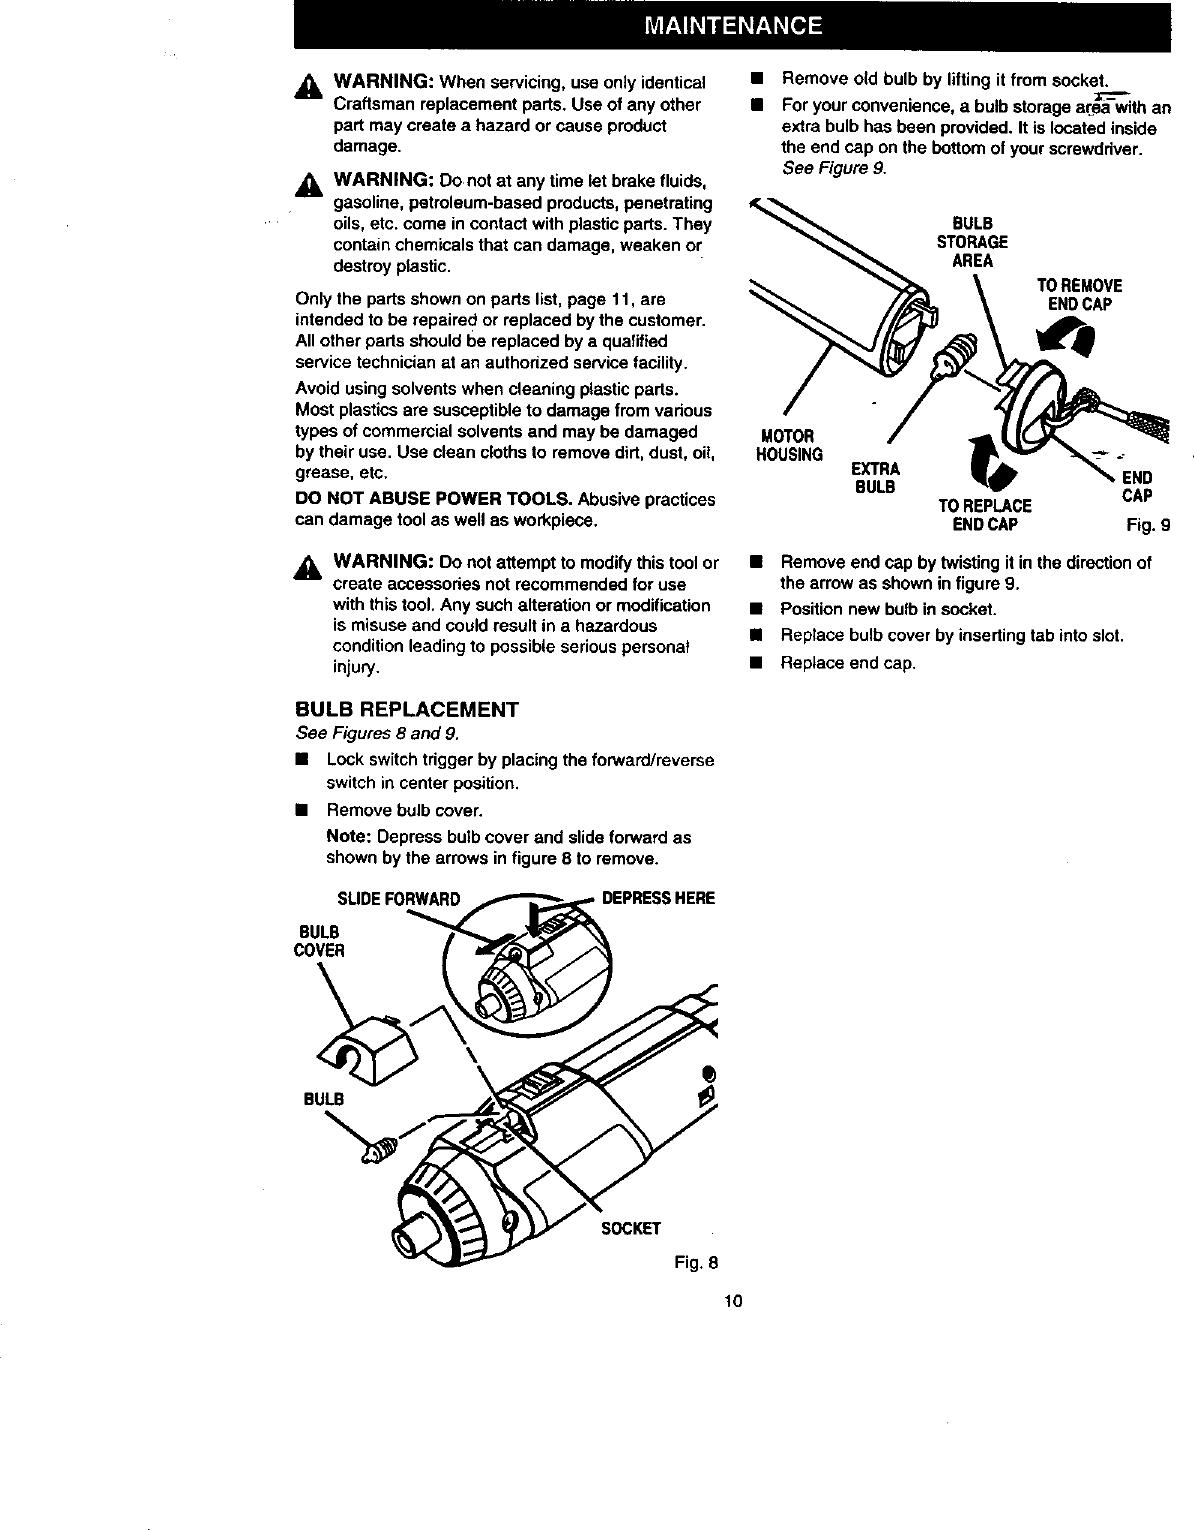 Page 10 of 12 - Craftsman 315111810 User Manual  SINGLE SPEED REVERSIBLE CORDLESS SCREWDRIVER - Manuals And Guides 98100166